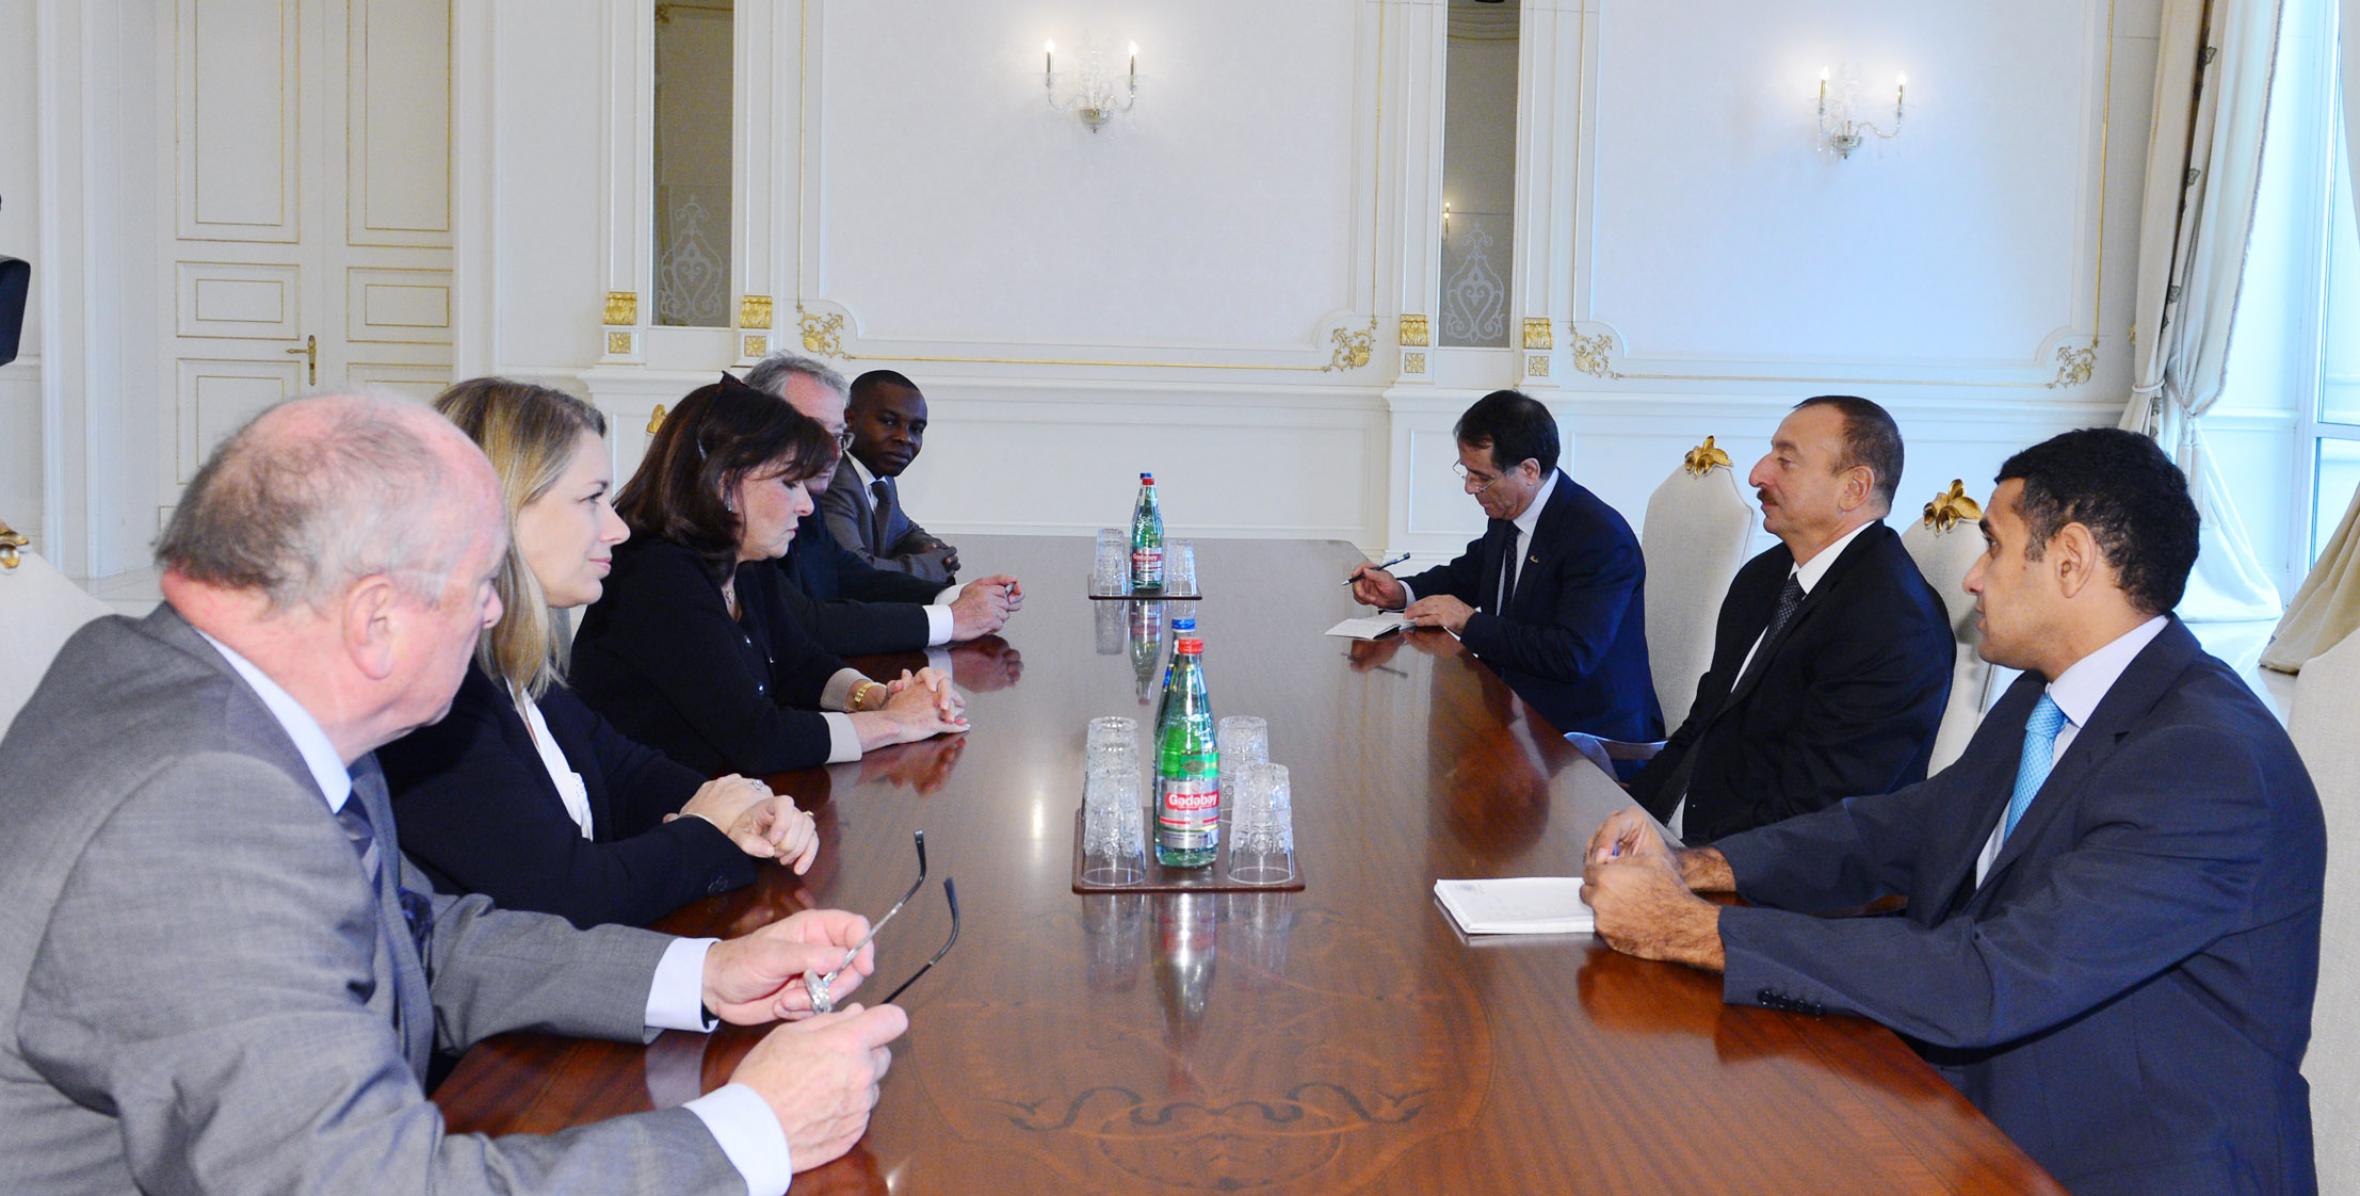 Ilham Aliyev received a delegation led by a member of the French Senate and the head of the Senate observation mission